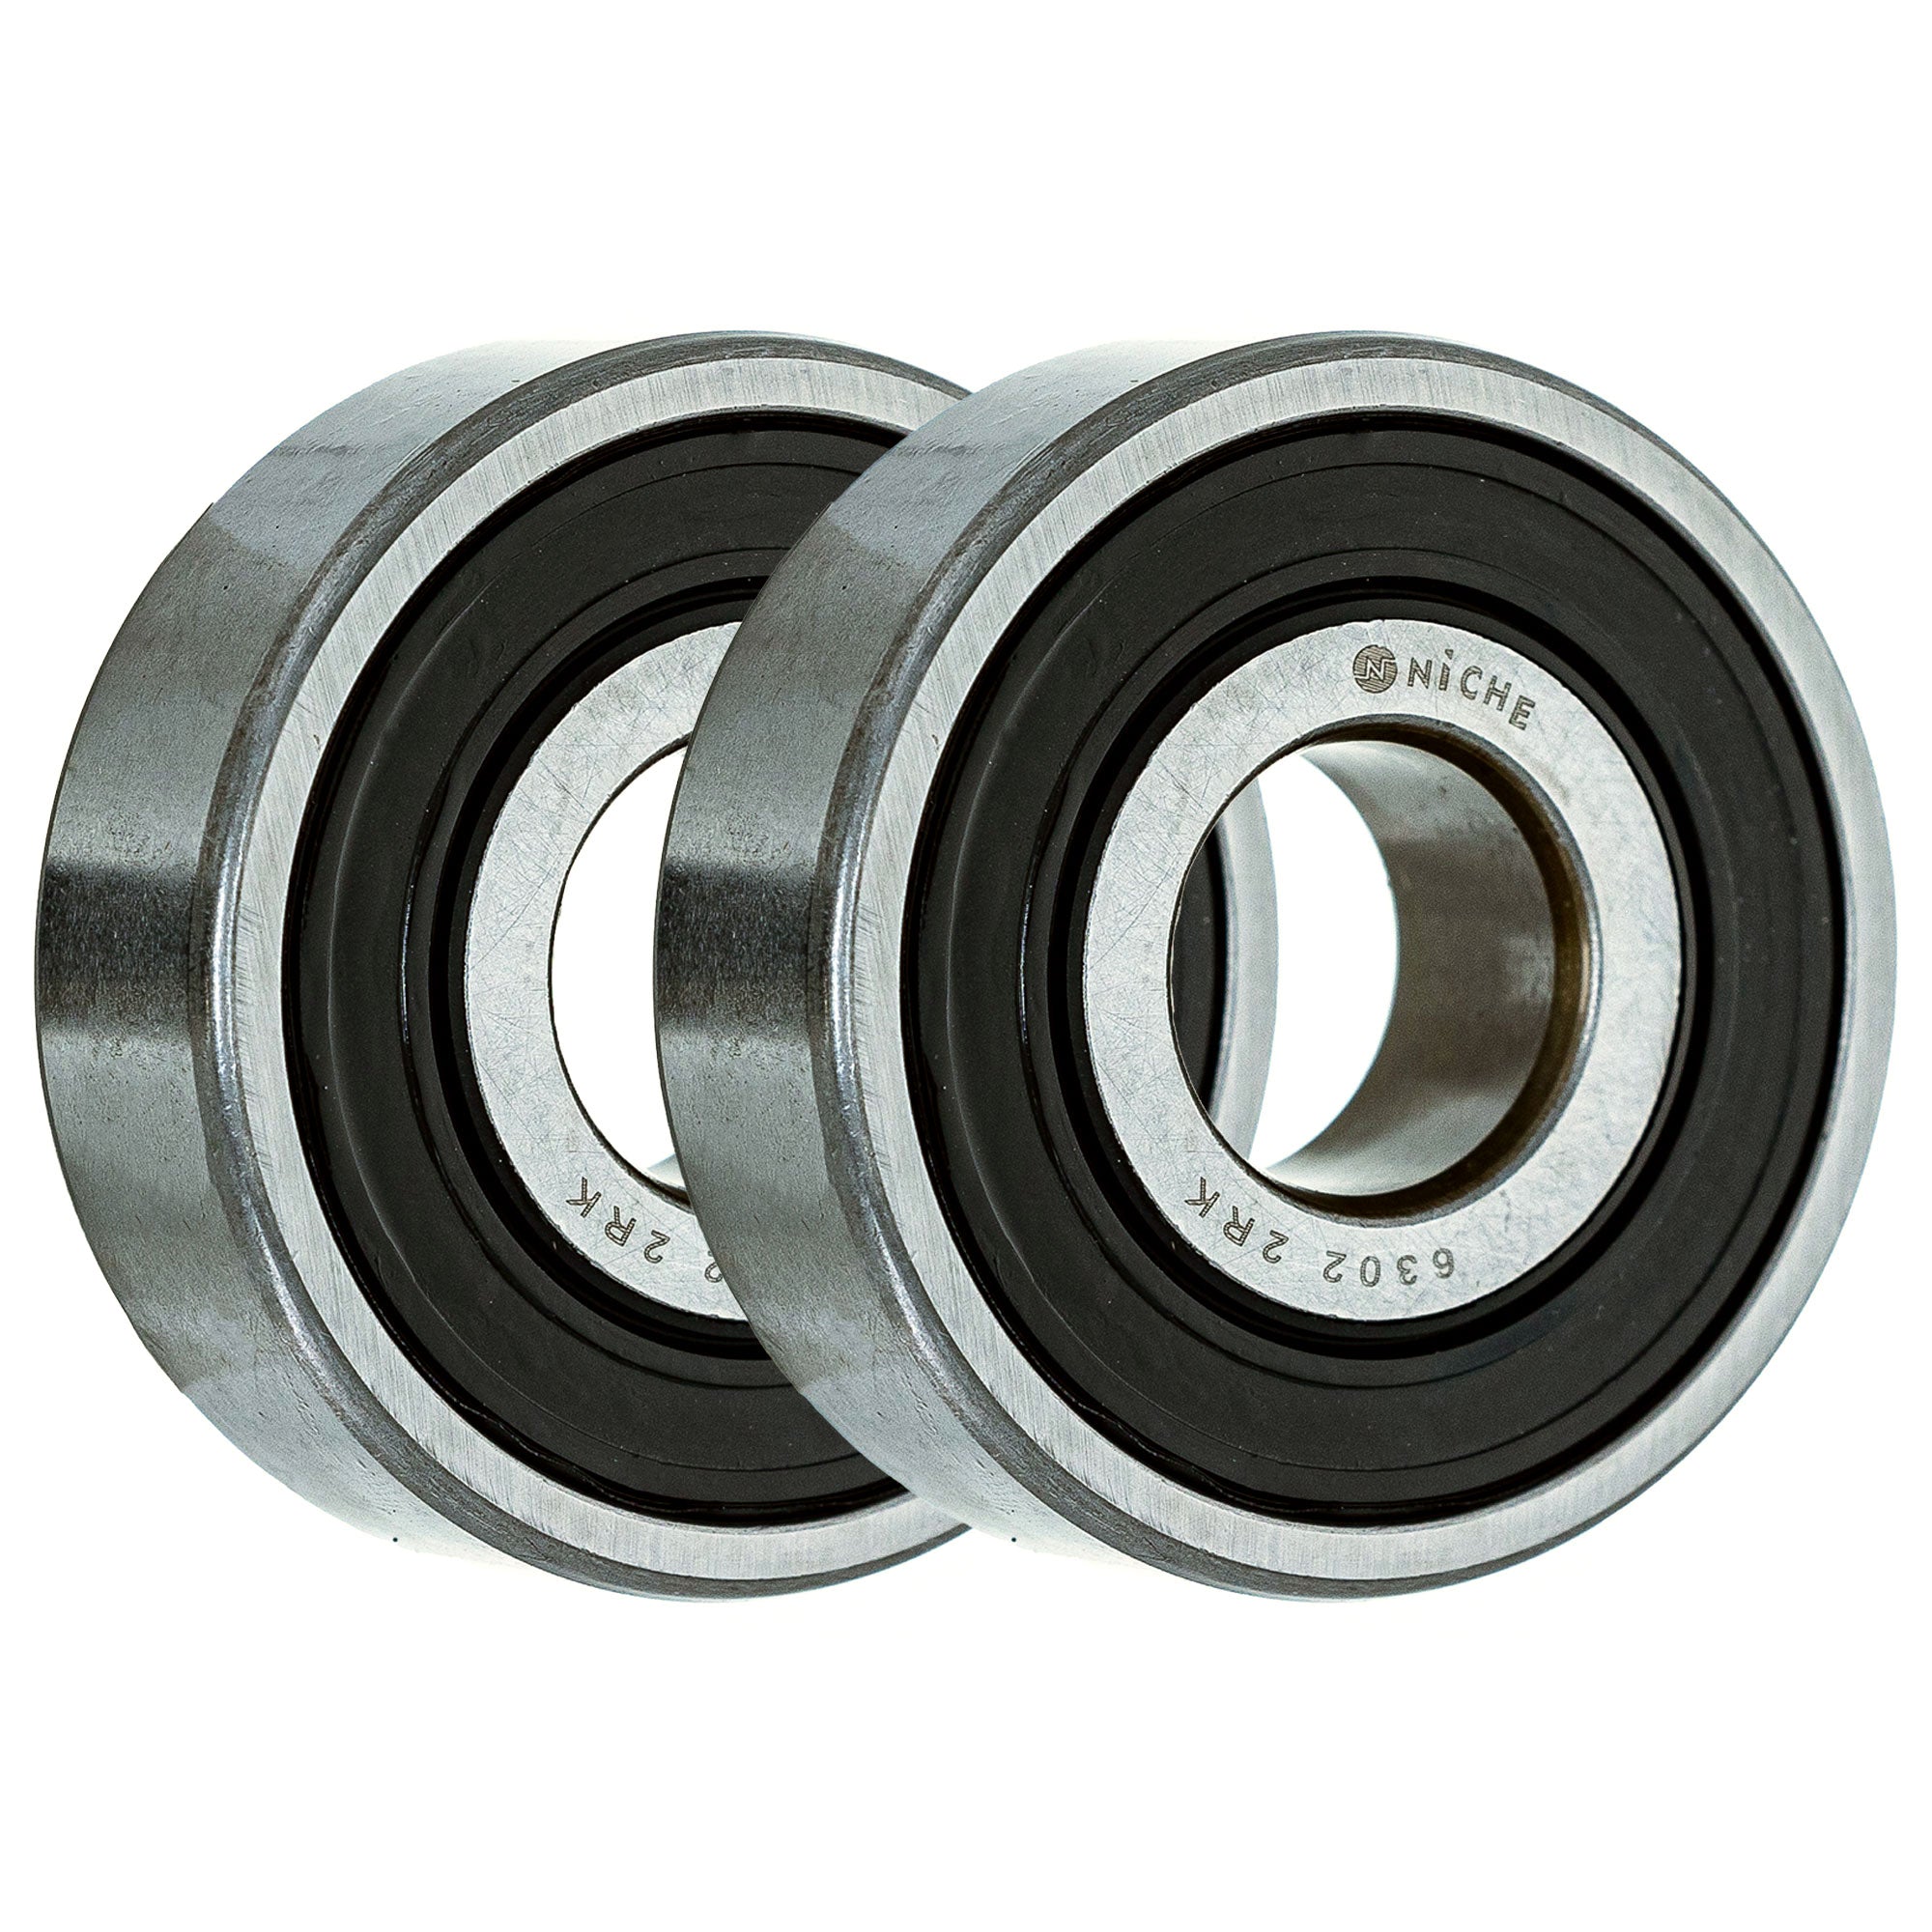 Single Row, Deep Groove, Ball Bearing Pack of 2 2-Pack for zOTHER XR200R XR200 XR185 XL350 NICHE 519-CBB2327R